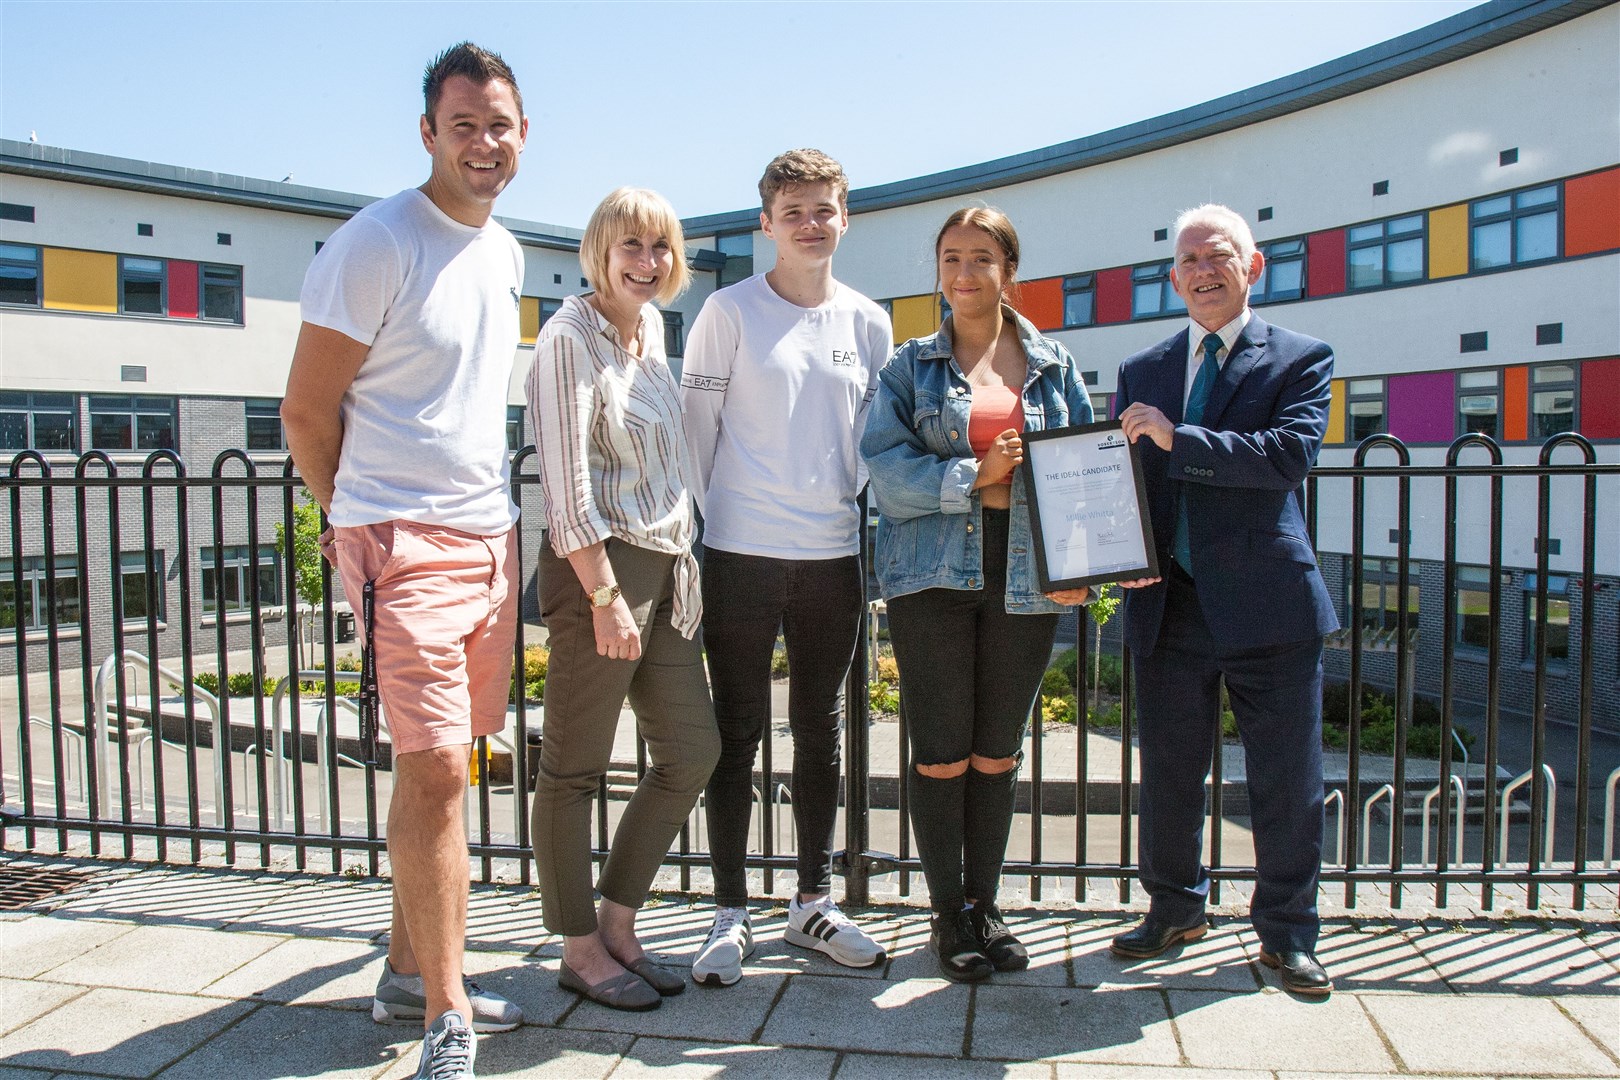 Celebrating the Ideal Candidate scheme are (from left) Elgin Academy's head teacher Kyle Scott, Developing the Young Workforce Lead of the school Lynne Bowley, winners Logan Glynn and Millie Whitta and Robertson Northern managing director Frank Reid.